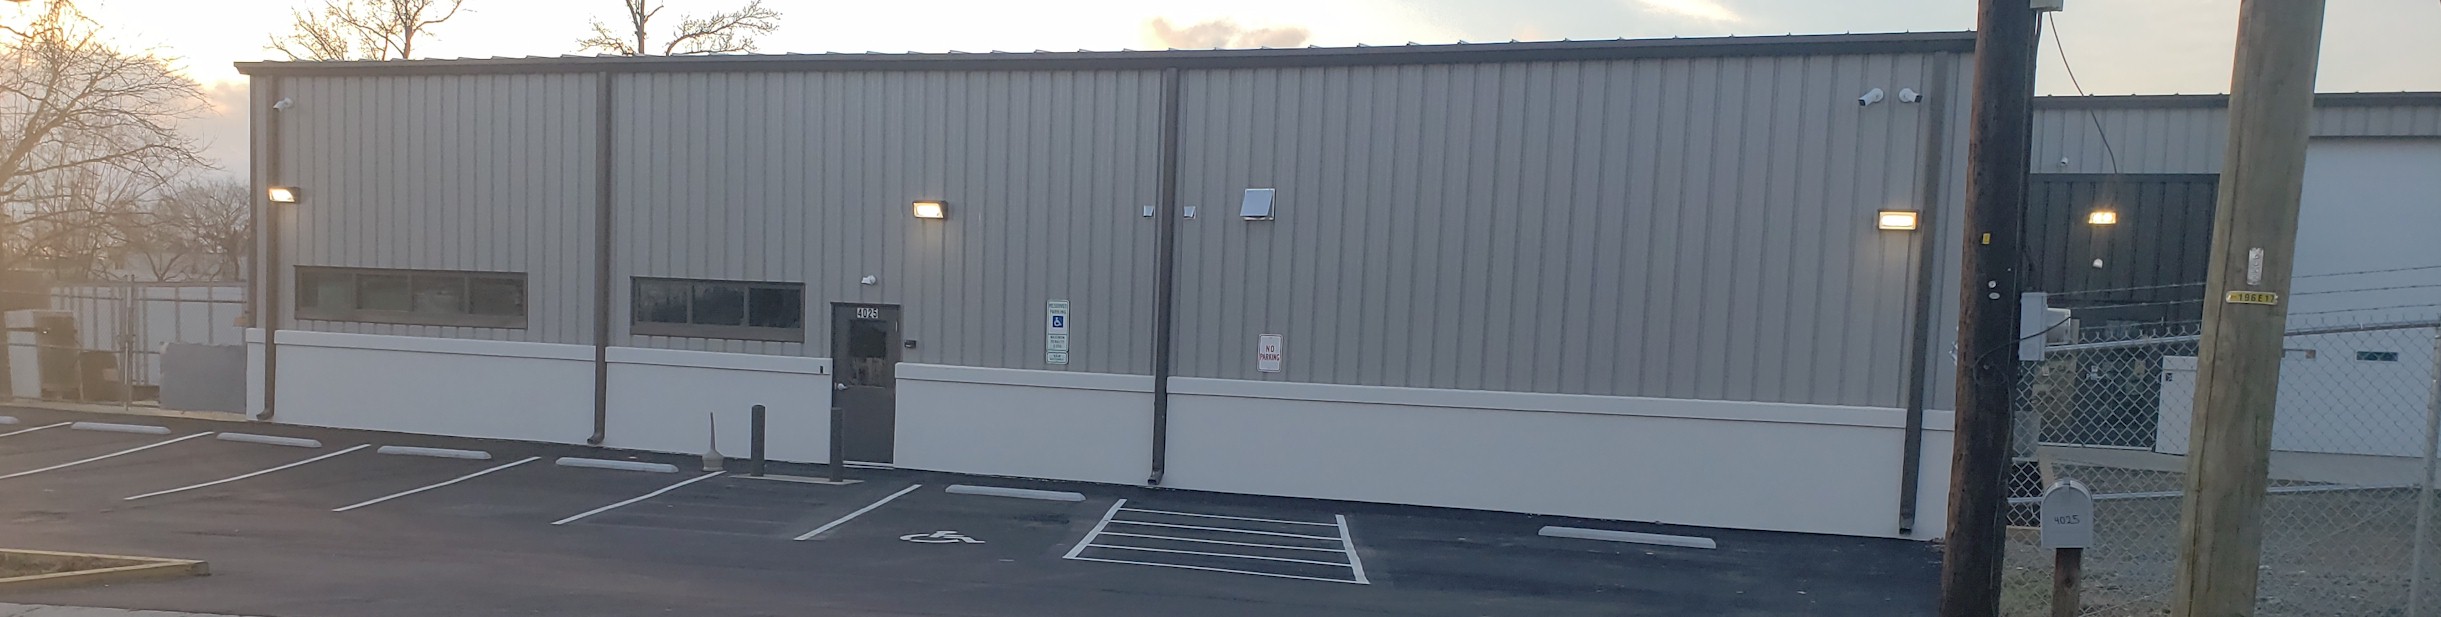 Barr-Nunn Charlotte, NC truck terminal building showing exterior view during business hours